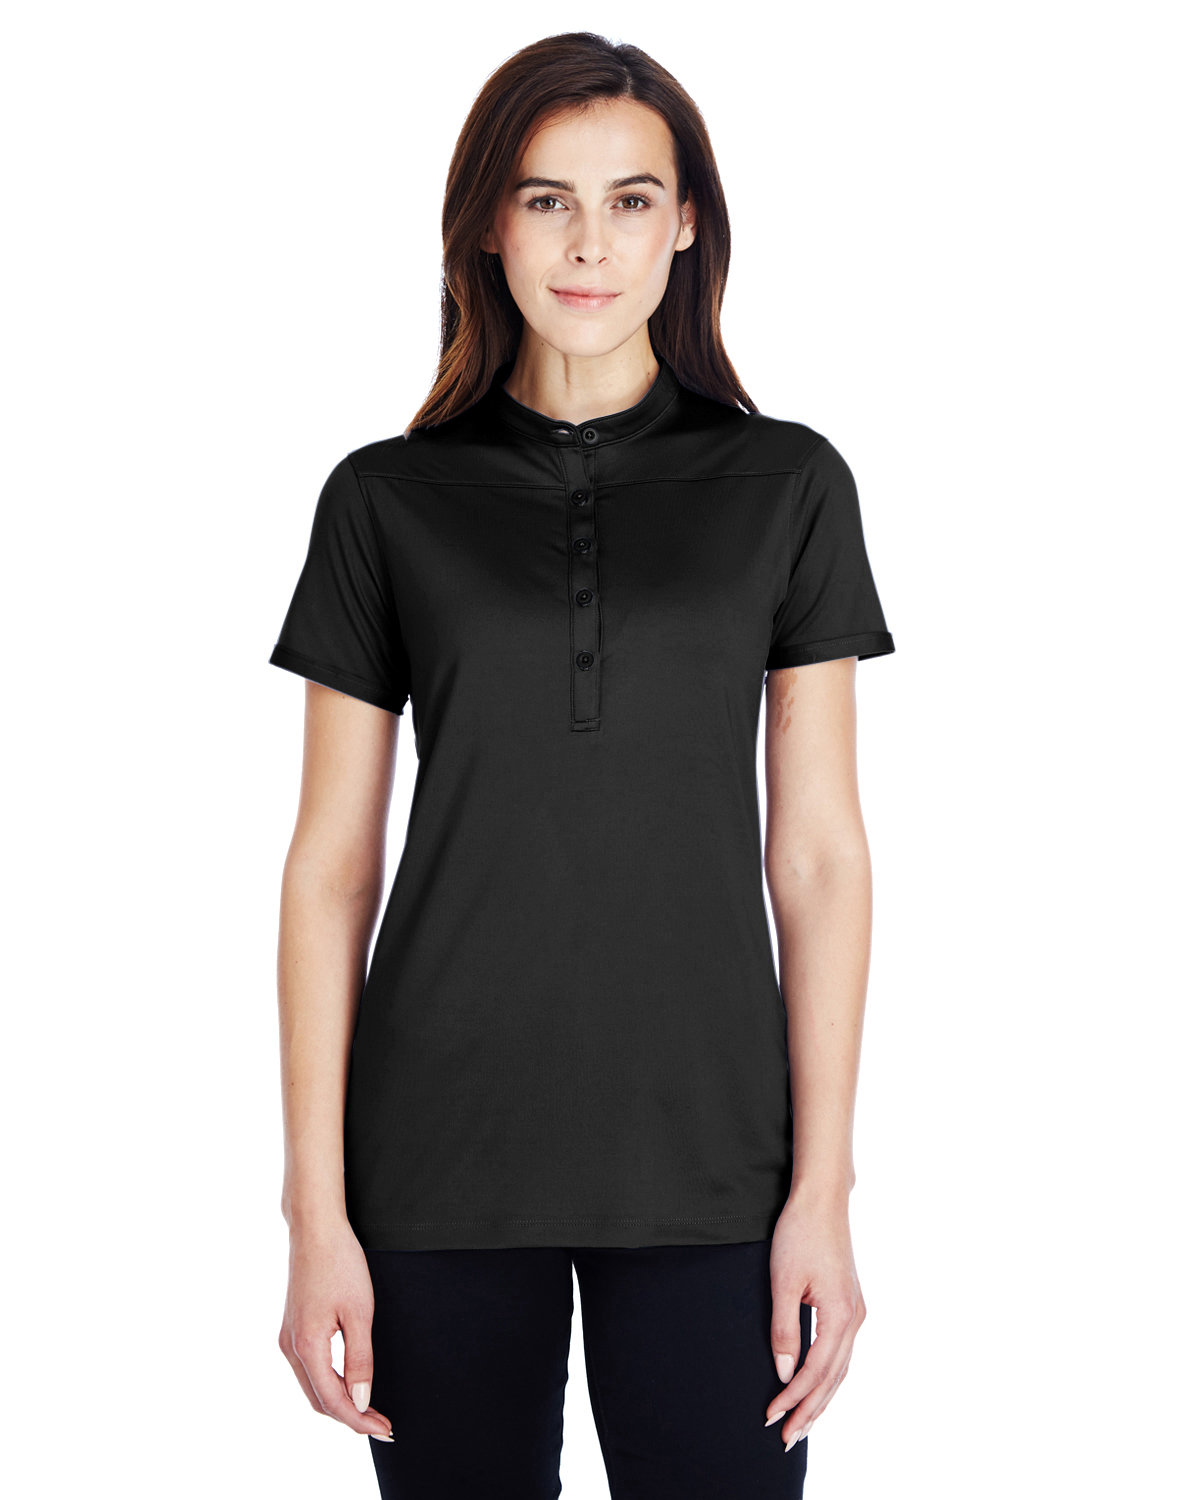 Under Armour SuperSale Ladies' Corporate Performance Polo 2.0 BLACK/ WHITE _001 